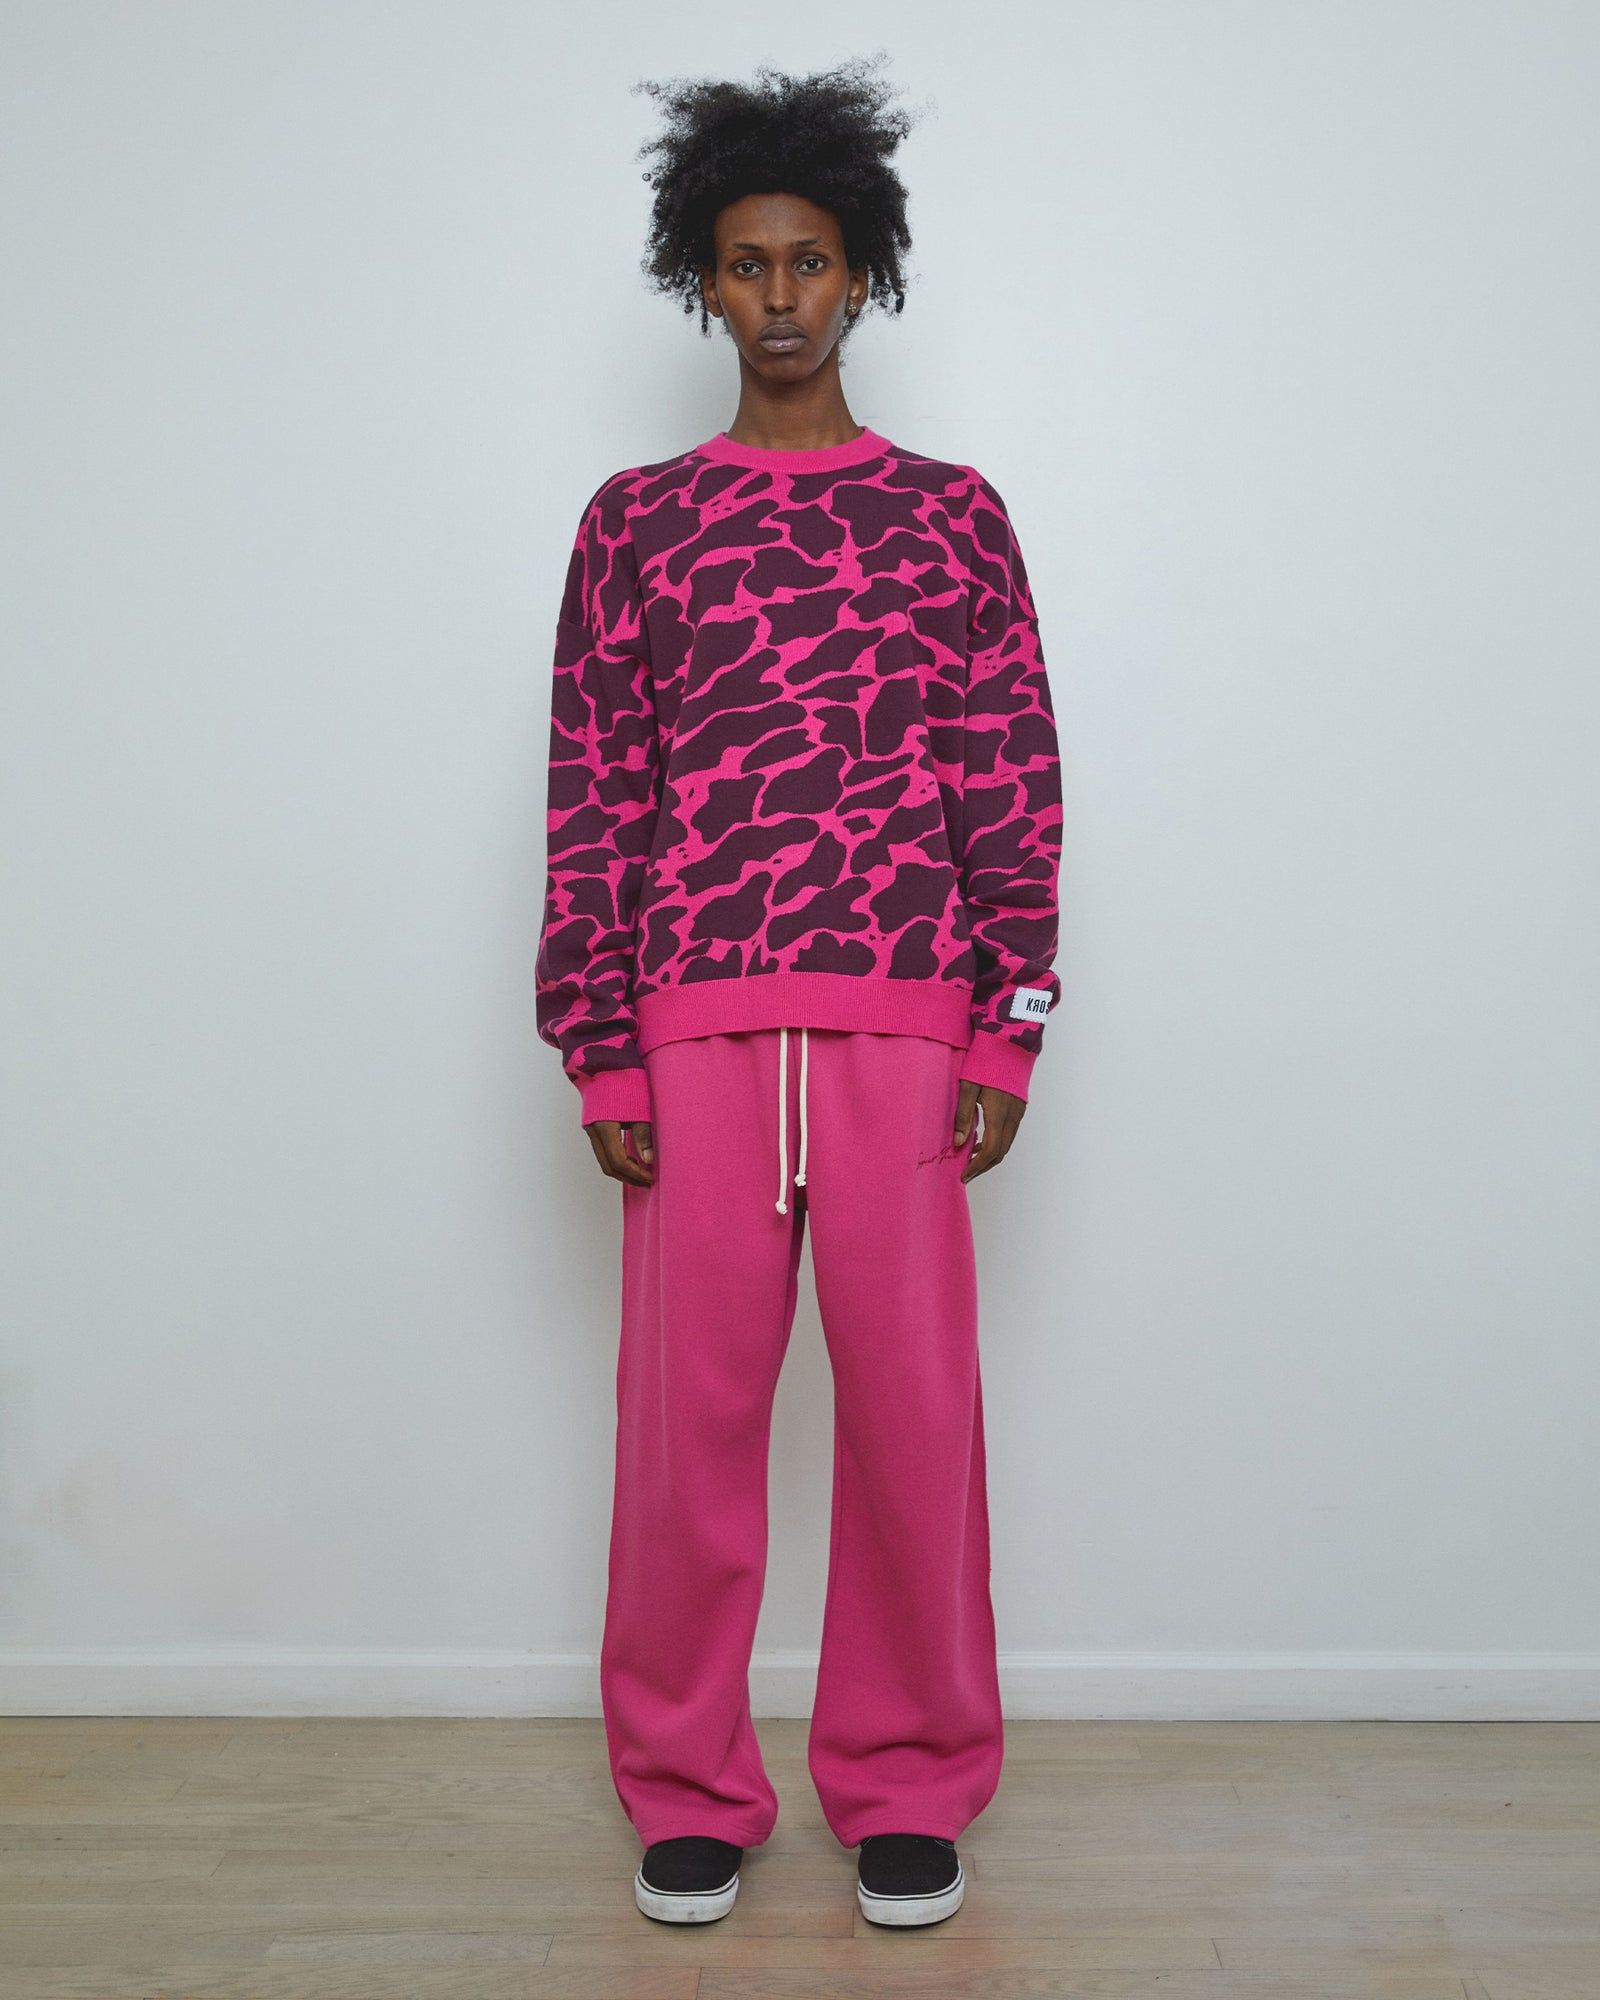 Unique brown print hot pink long sleeve 100% cotton sweater & hot pink sweatpants for men and women